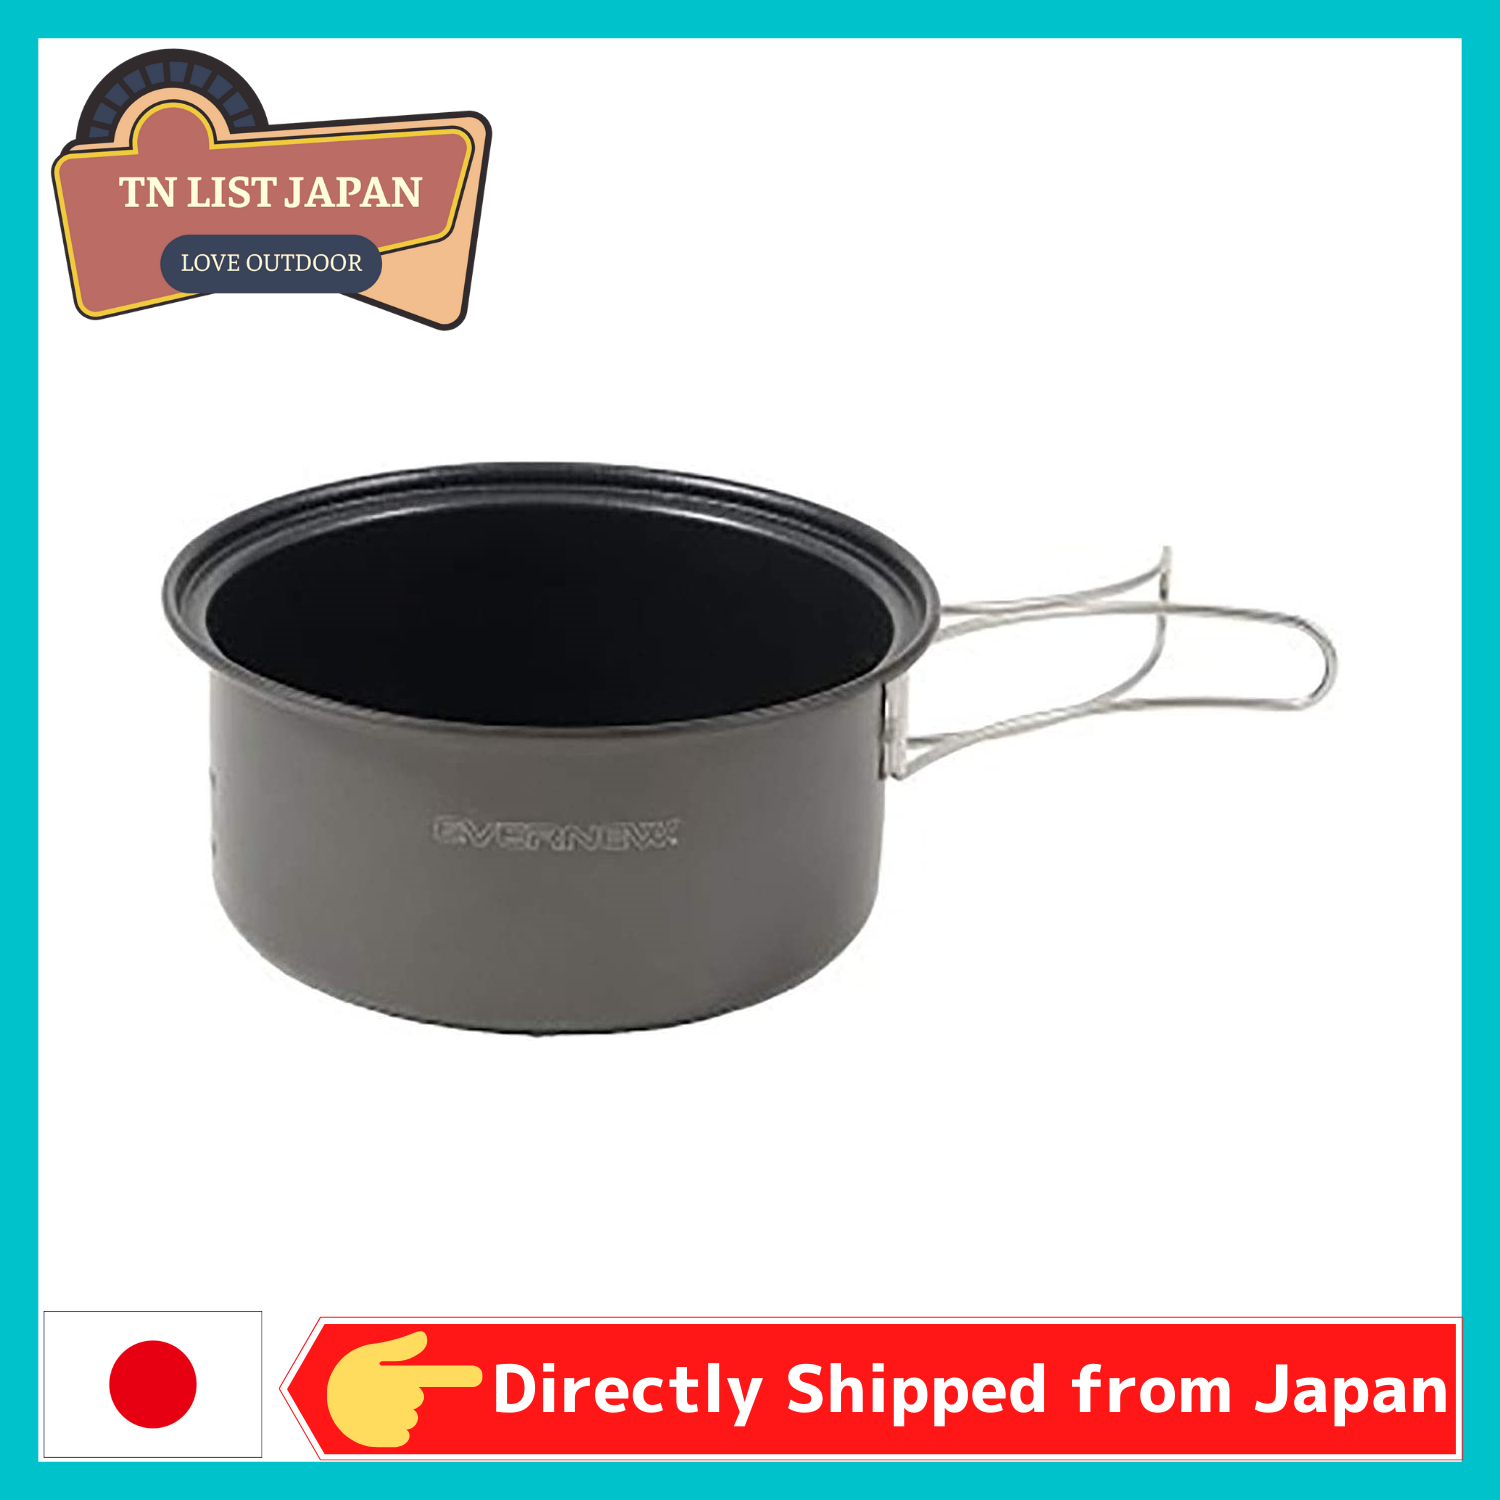 Shipping from Japan】 SHIMANO Double shaft reel(offshore/ship small) 20  GENPU Left handle (201PG) Fishing Reel Top Japanese Outdoor Brand Camp  goods BBQ goods Goods for Outdoor activities High quality outdoor item Enjoy